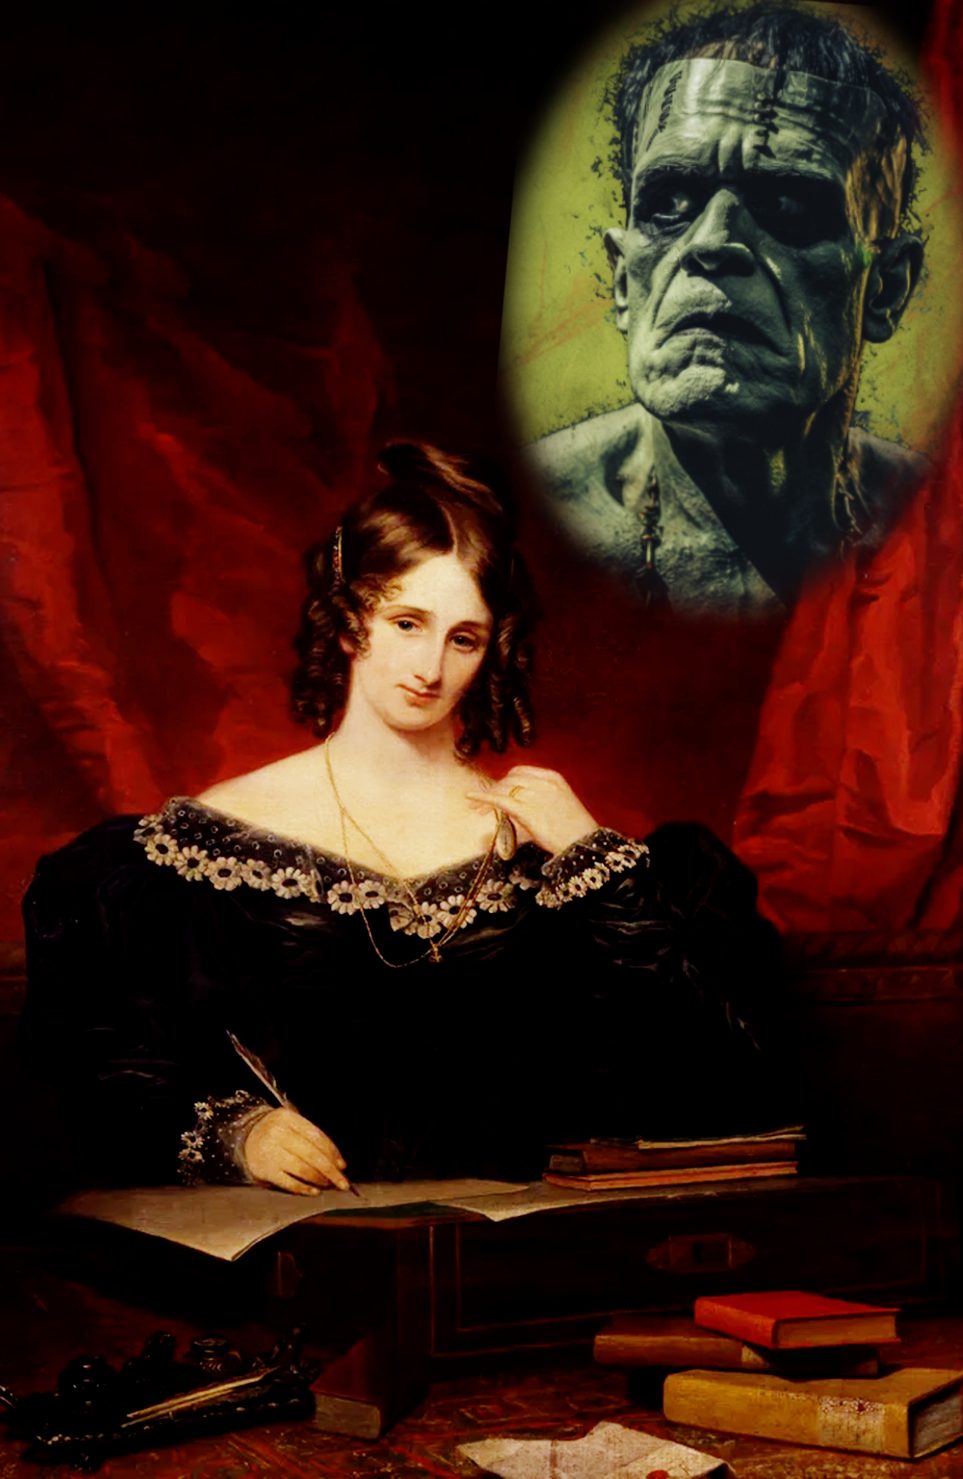 Mary Shelley sitting at a desk and writing, Frankenstein's monster appears in a thought bubble above her.